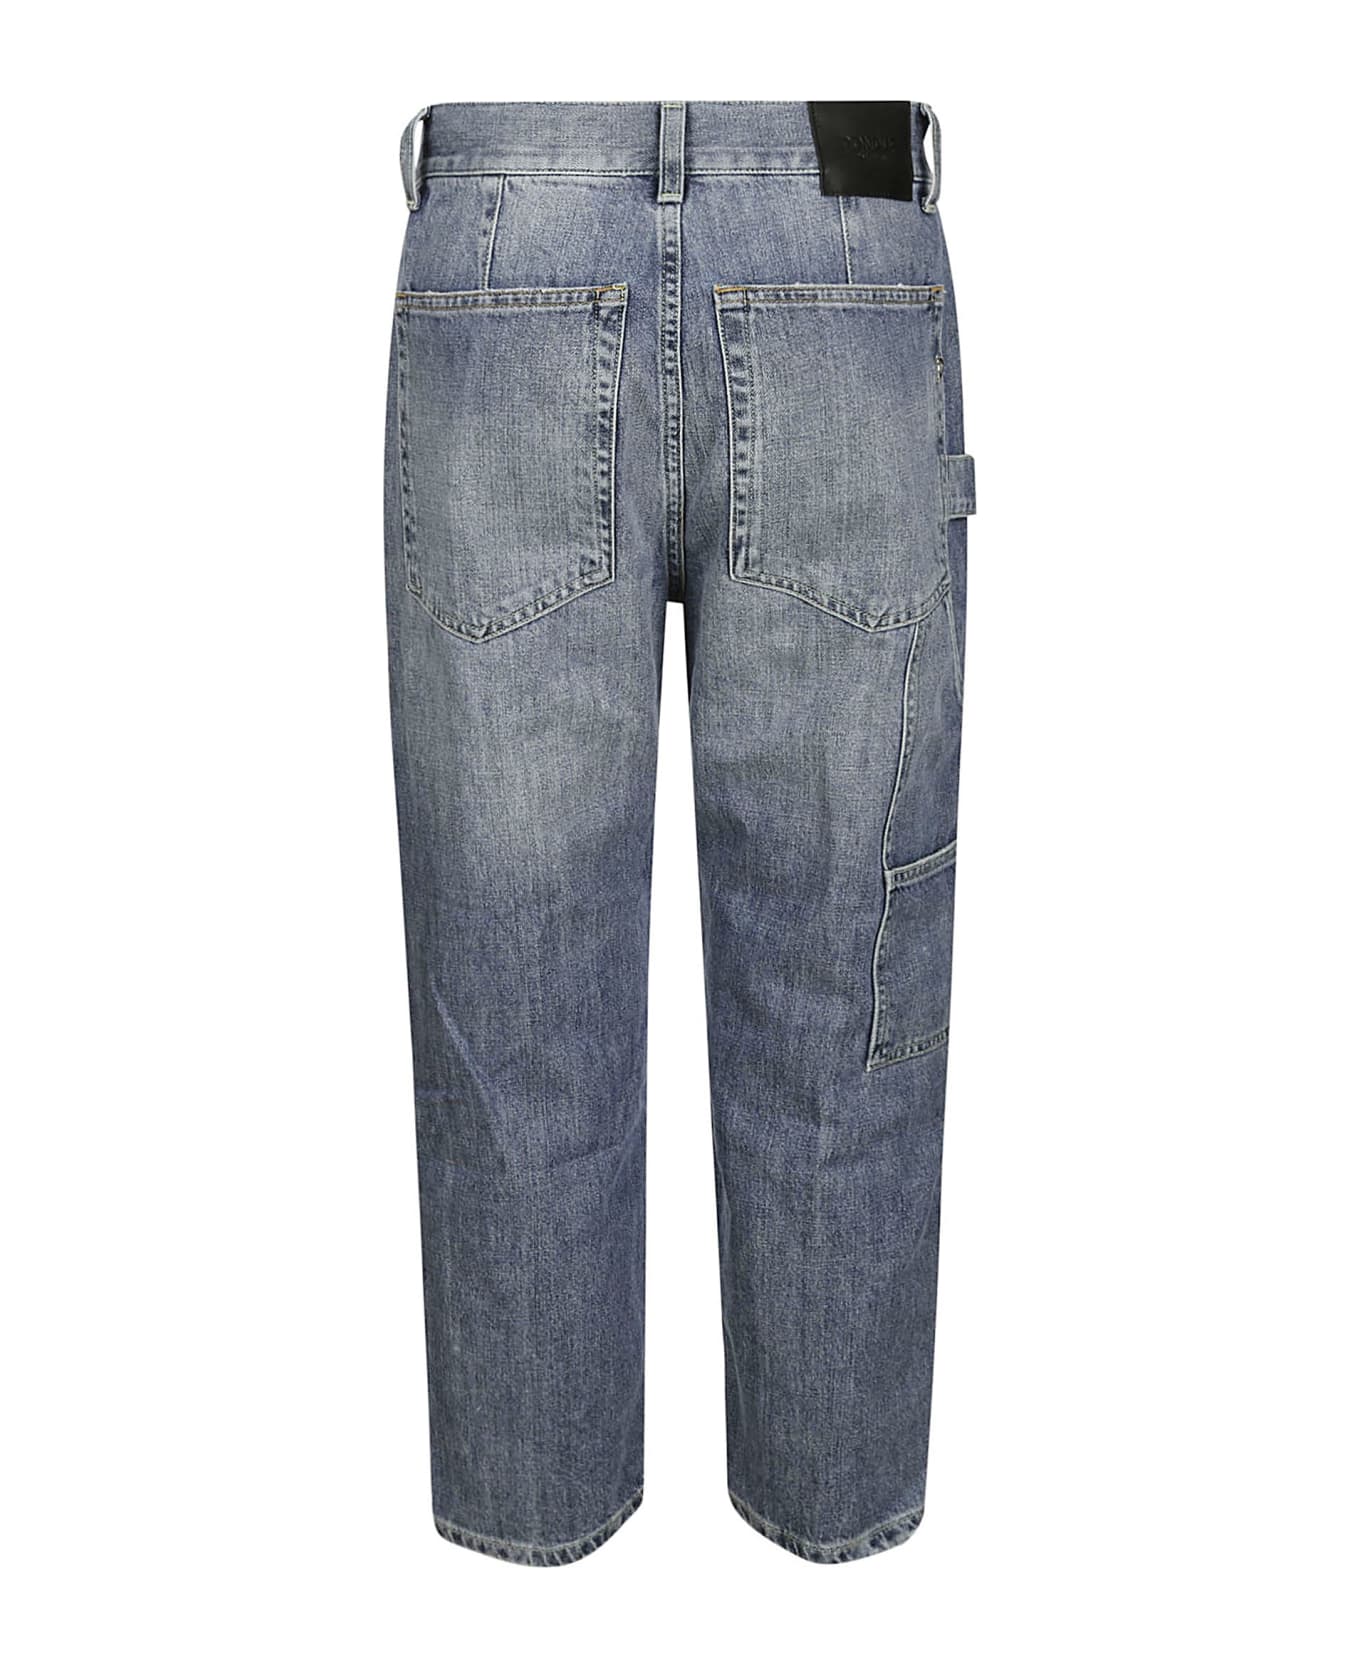 Dondup 'carrie' Jeans - BLUE デニム